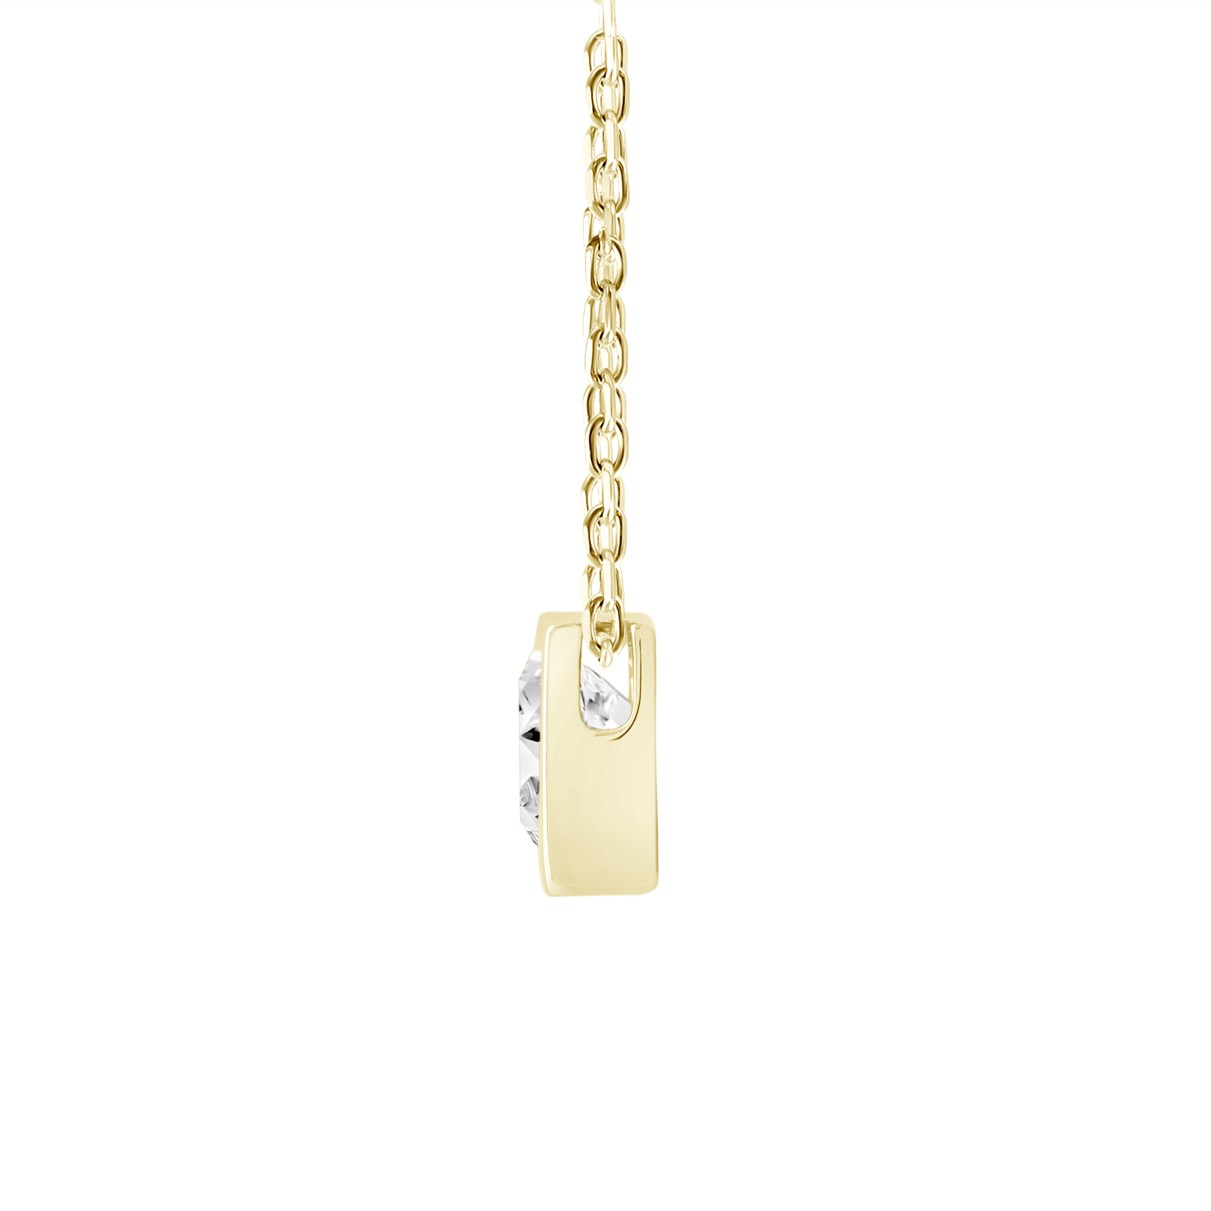 LADIES SOLITAIRE PENDANT 1CT PRINCESS DIAMOND 14K YELLOW GOLD WITH CHAIN